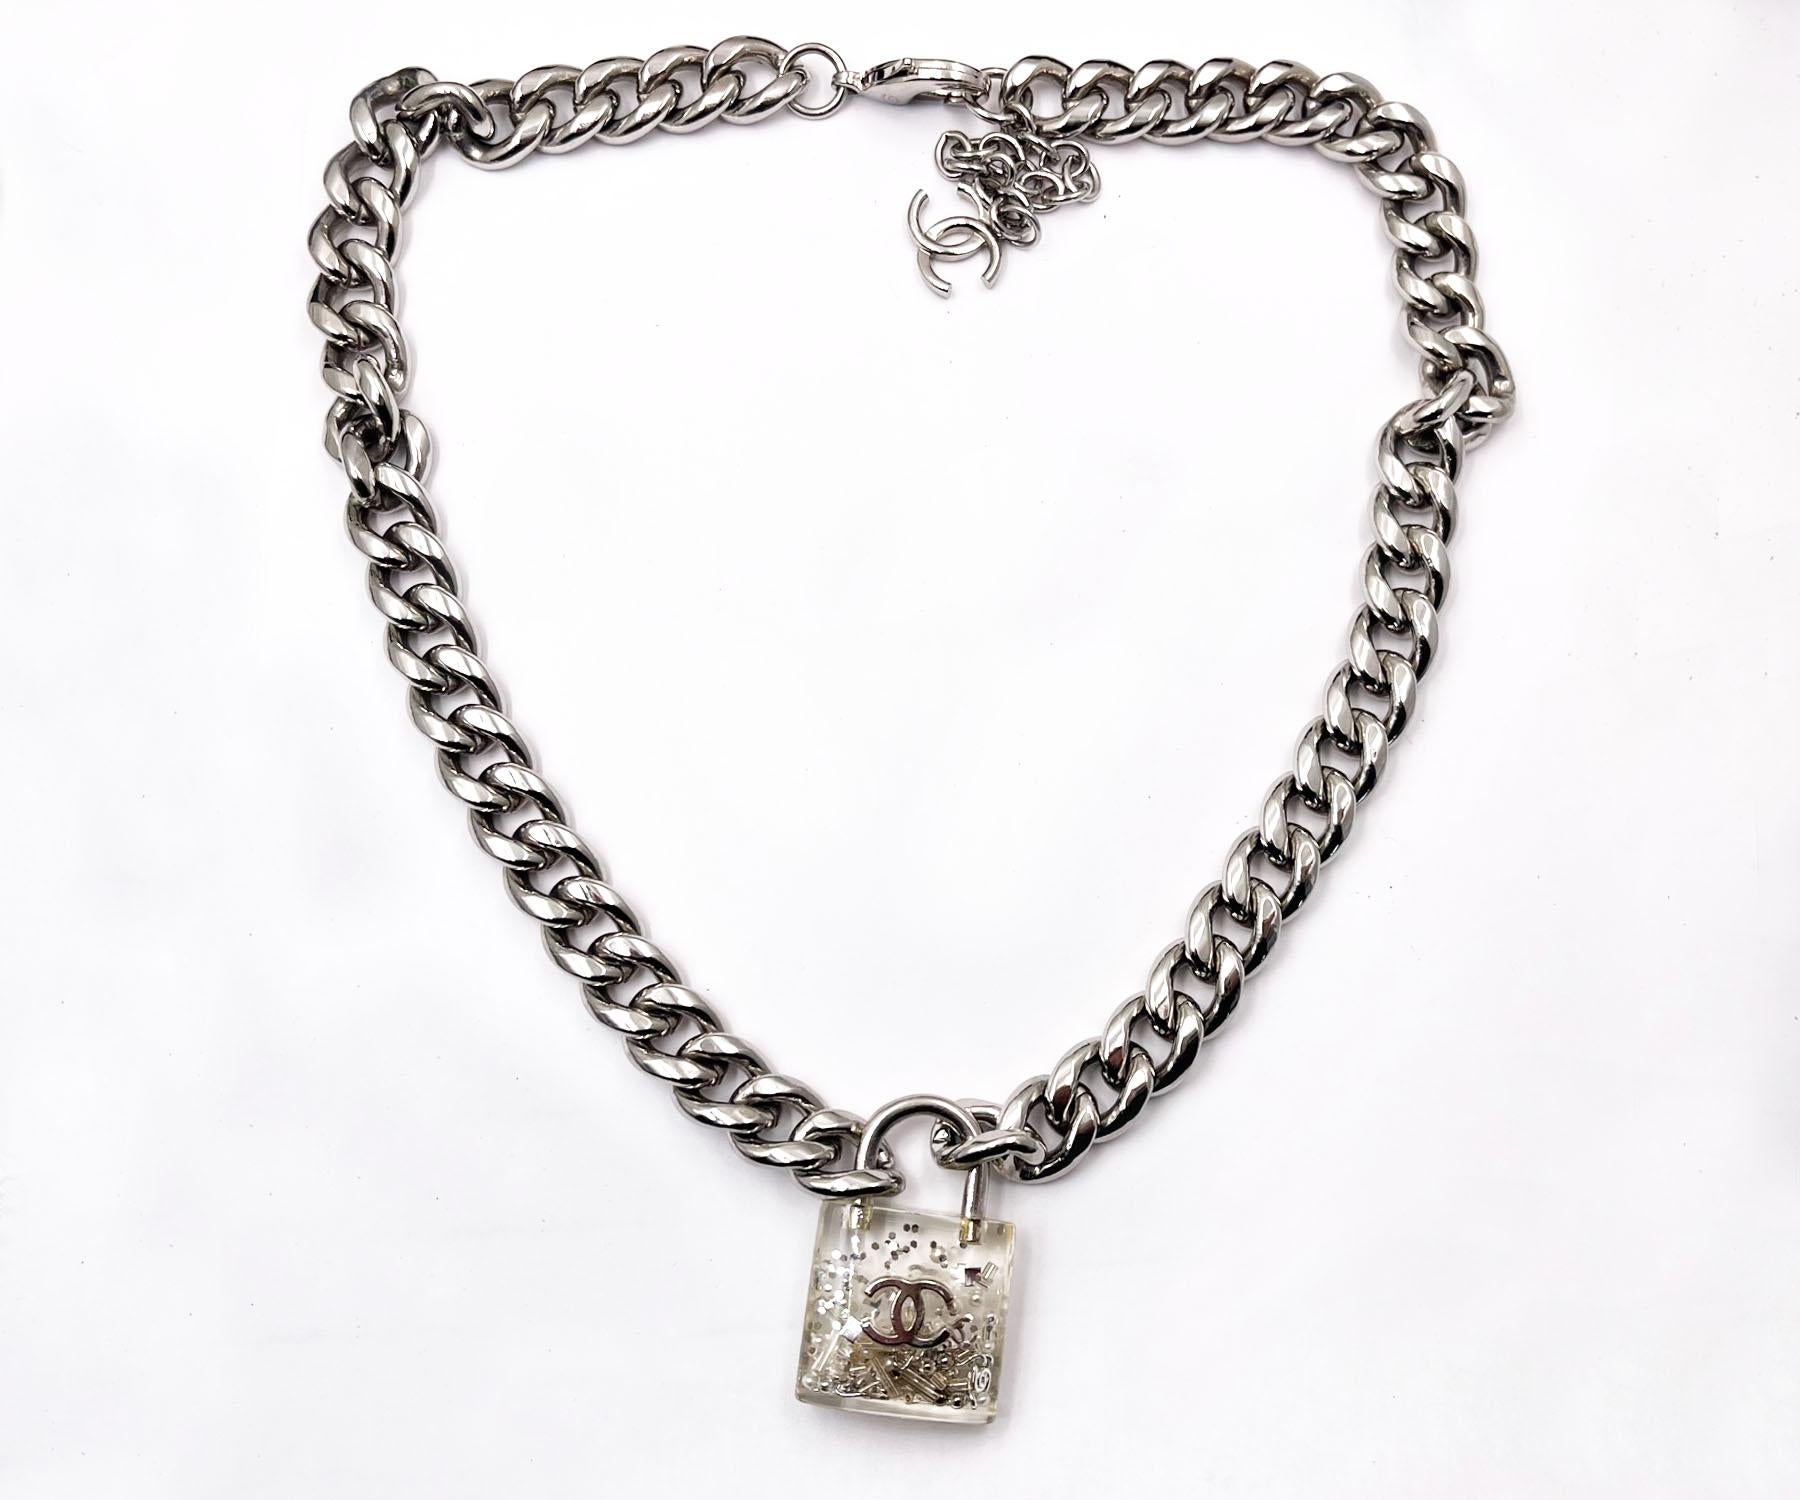 Chanel Silver CC Glitter Lock Chunky Chain Necklace

*Marked 14
*Made in France
*Comes with the original box and pouch

-The length is about 23